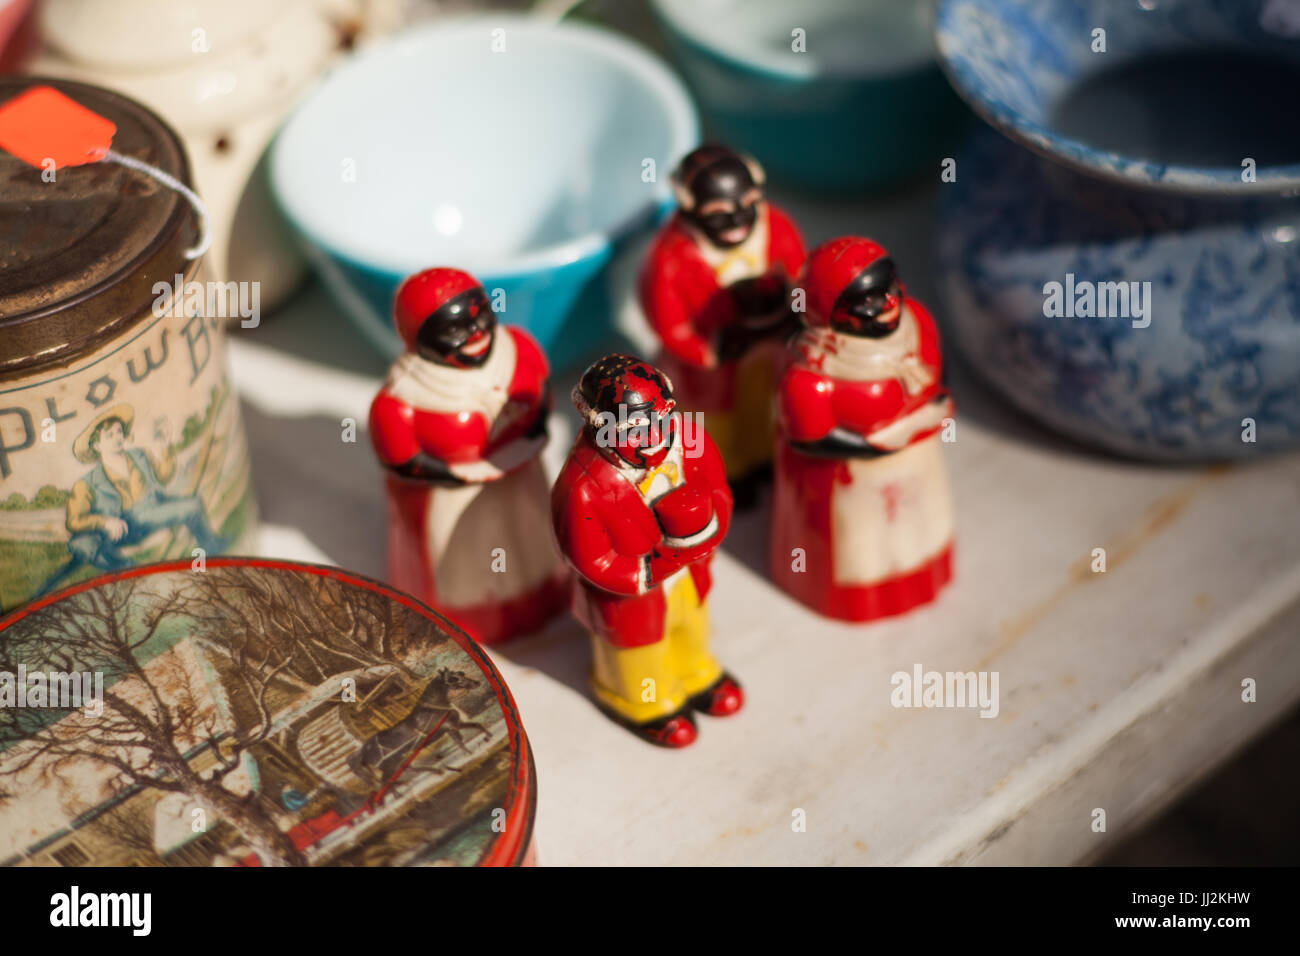 Racist salt and pepper shakers Stock Photo